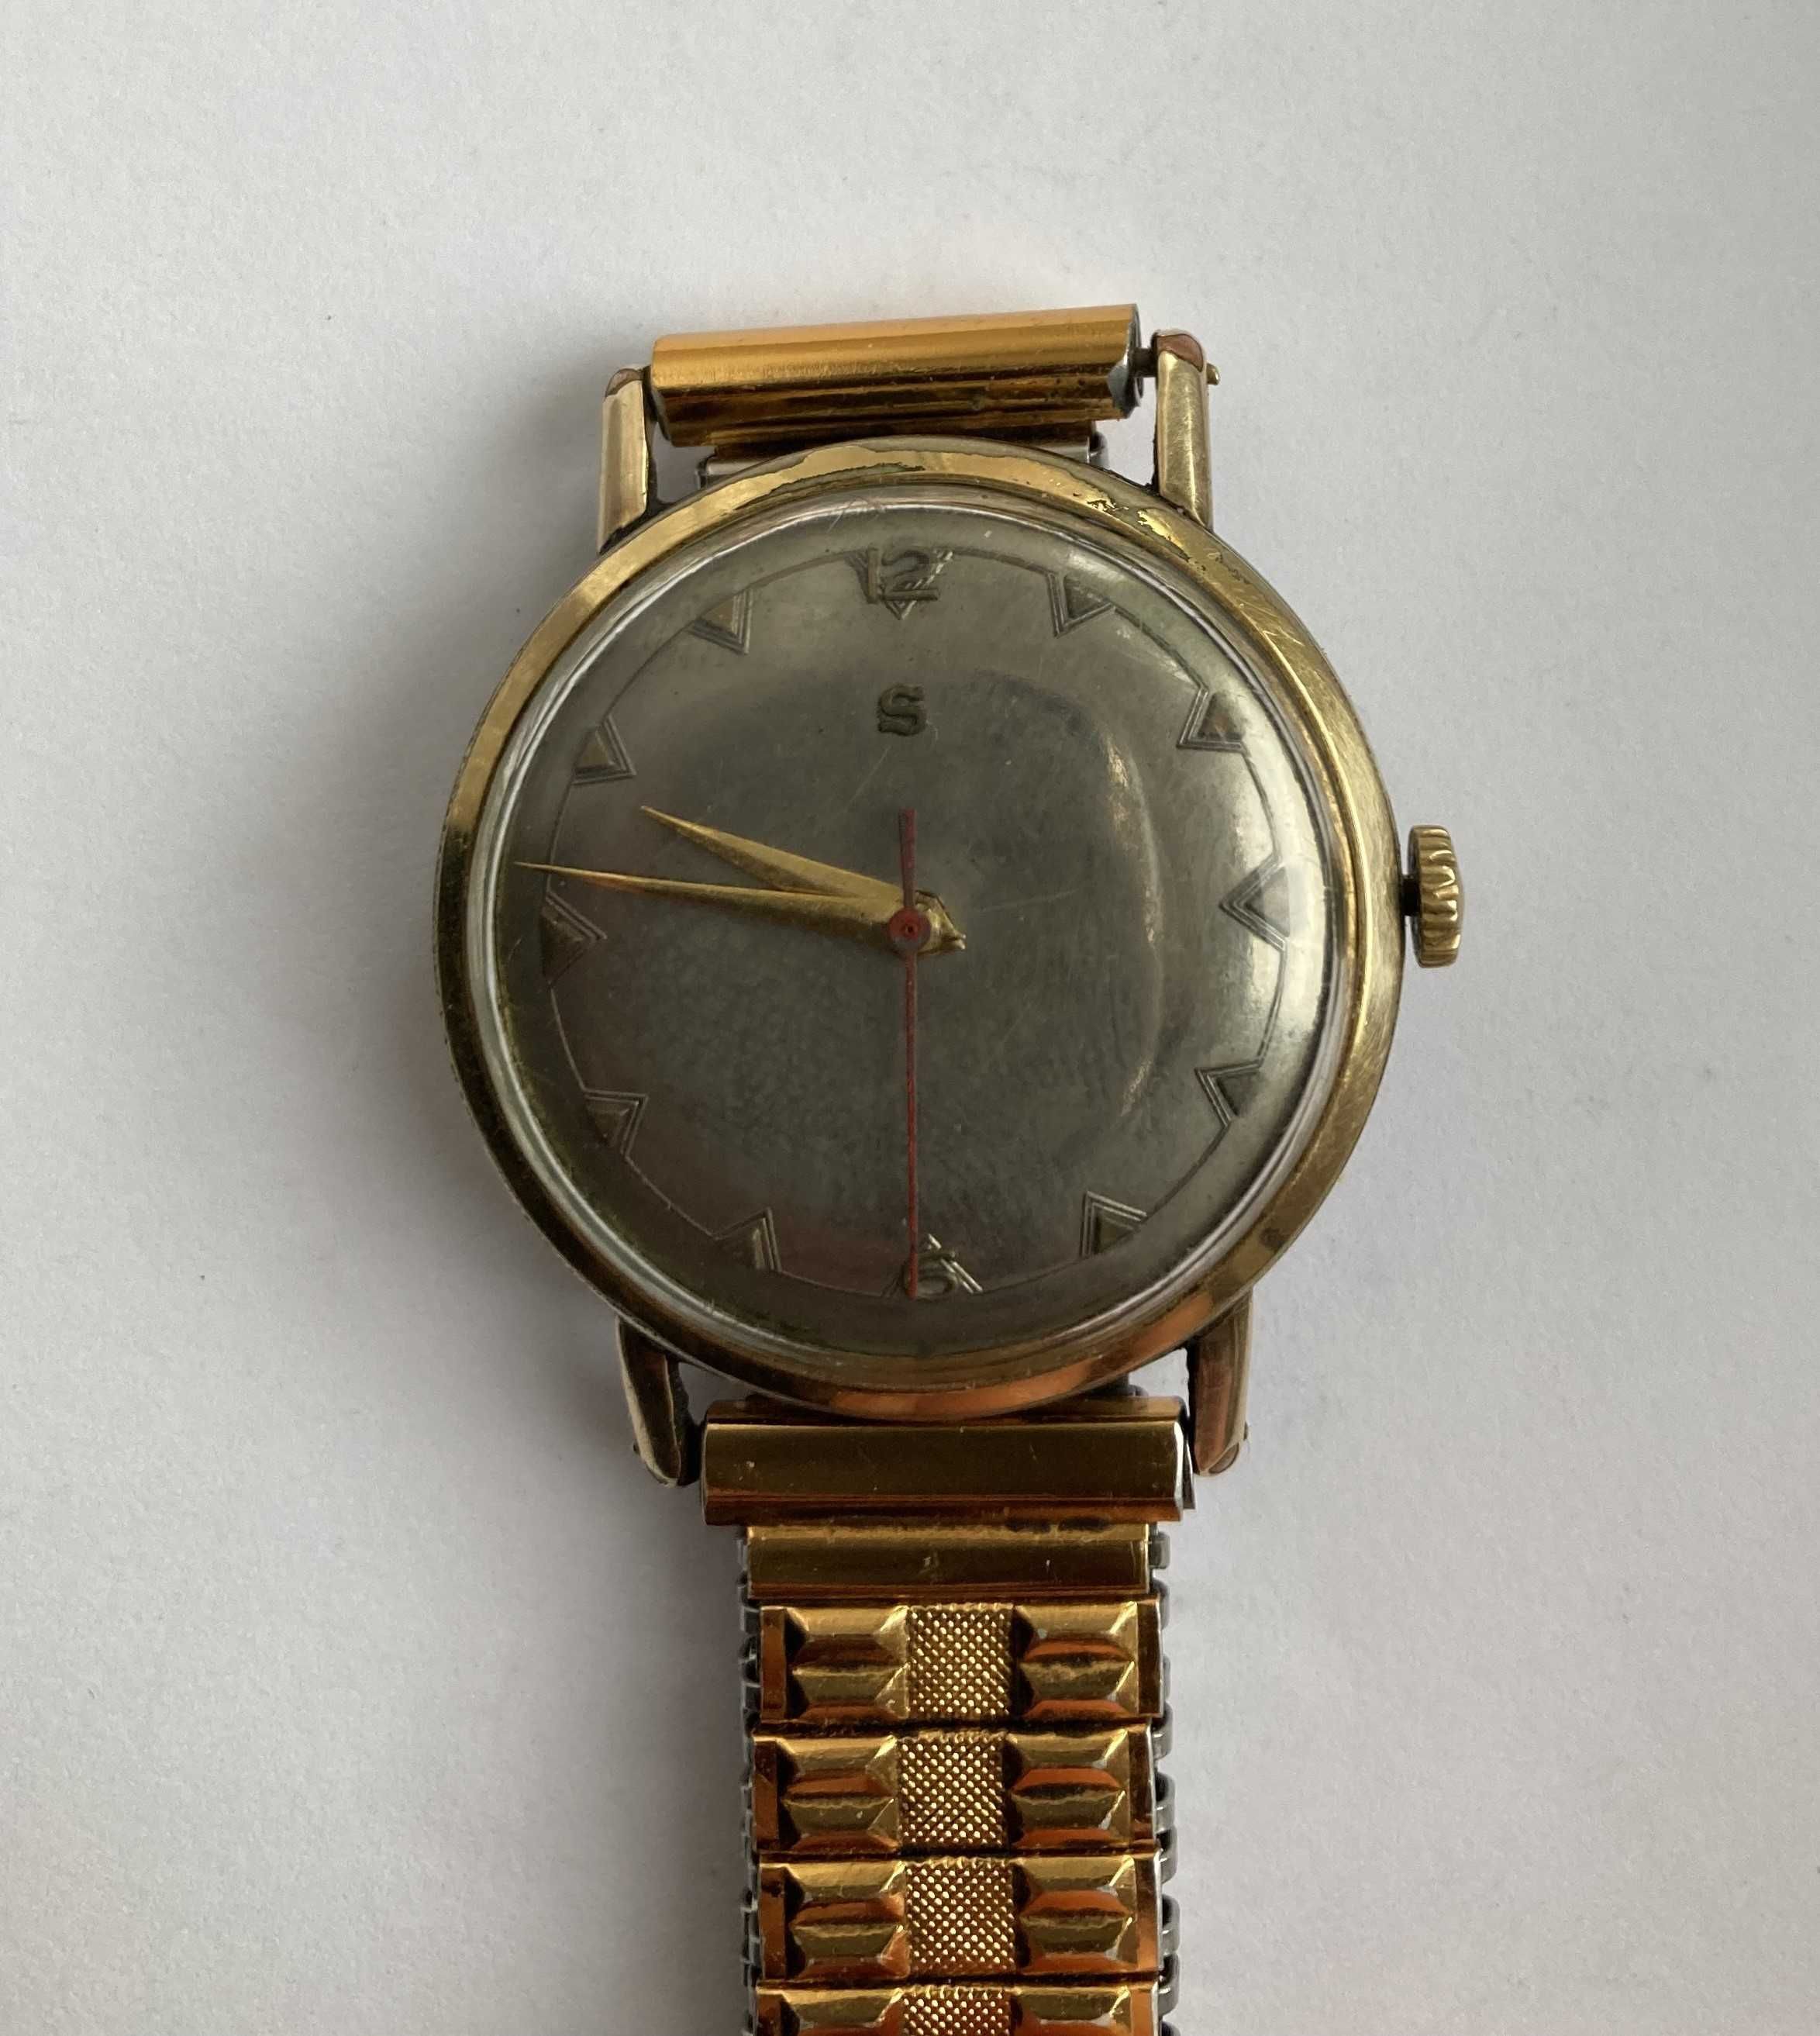 Ceas Seiko vintage, front 14k gold filled, in stare de functionare